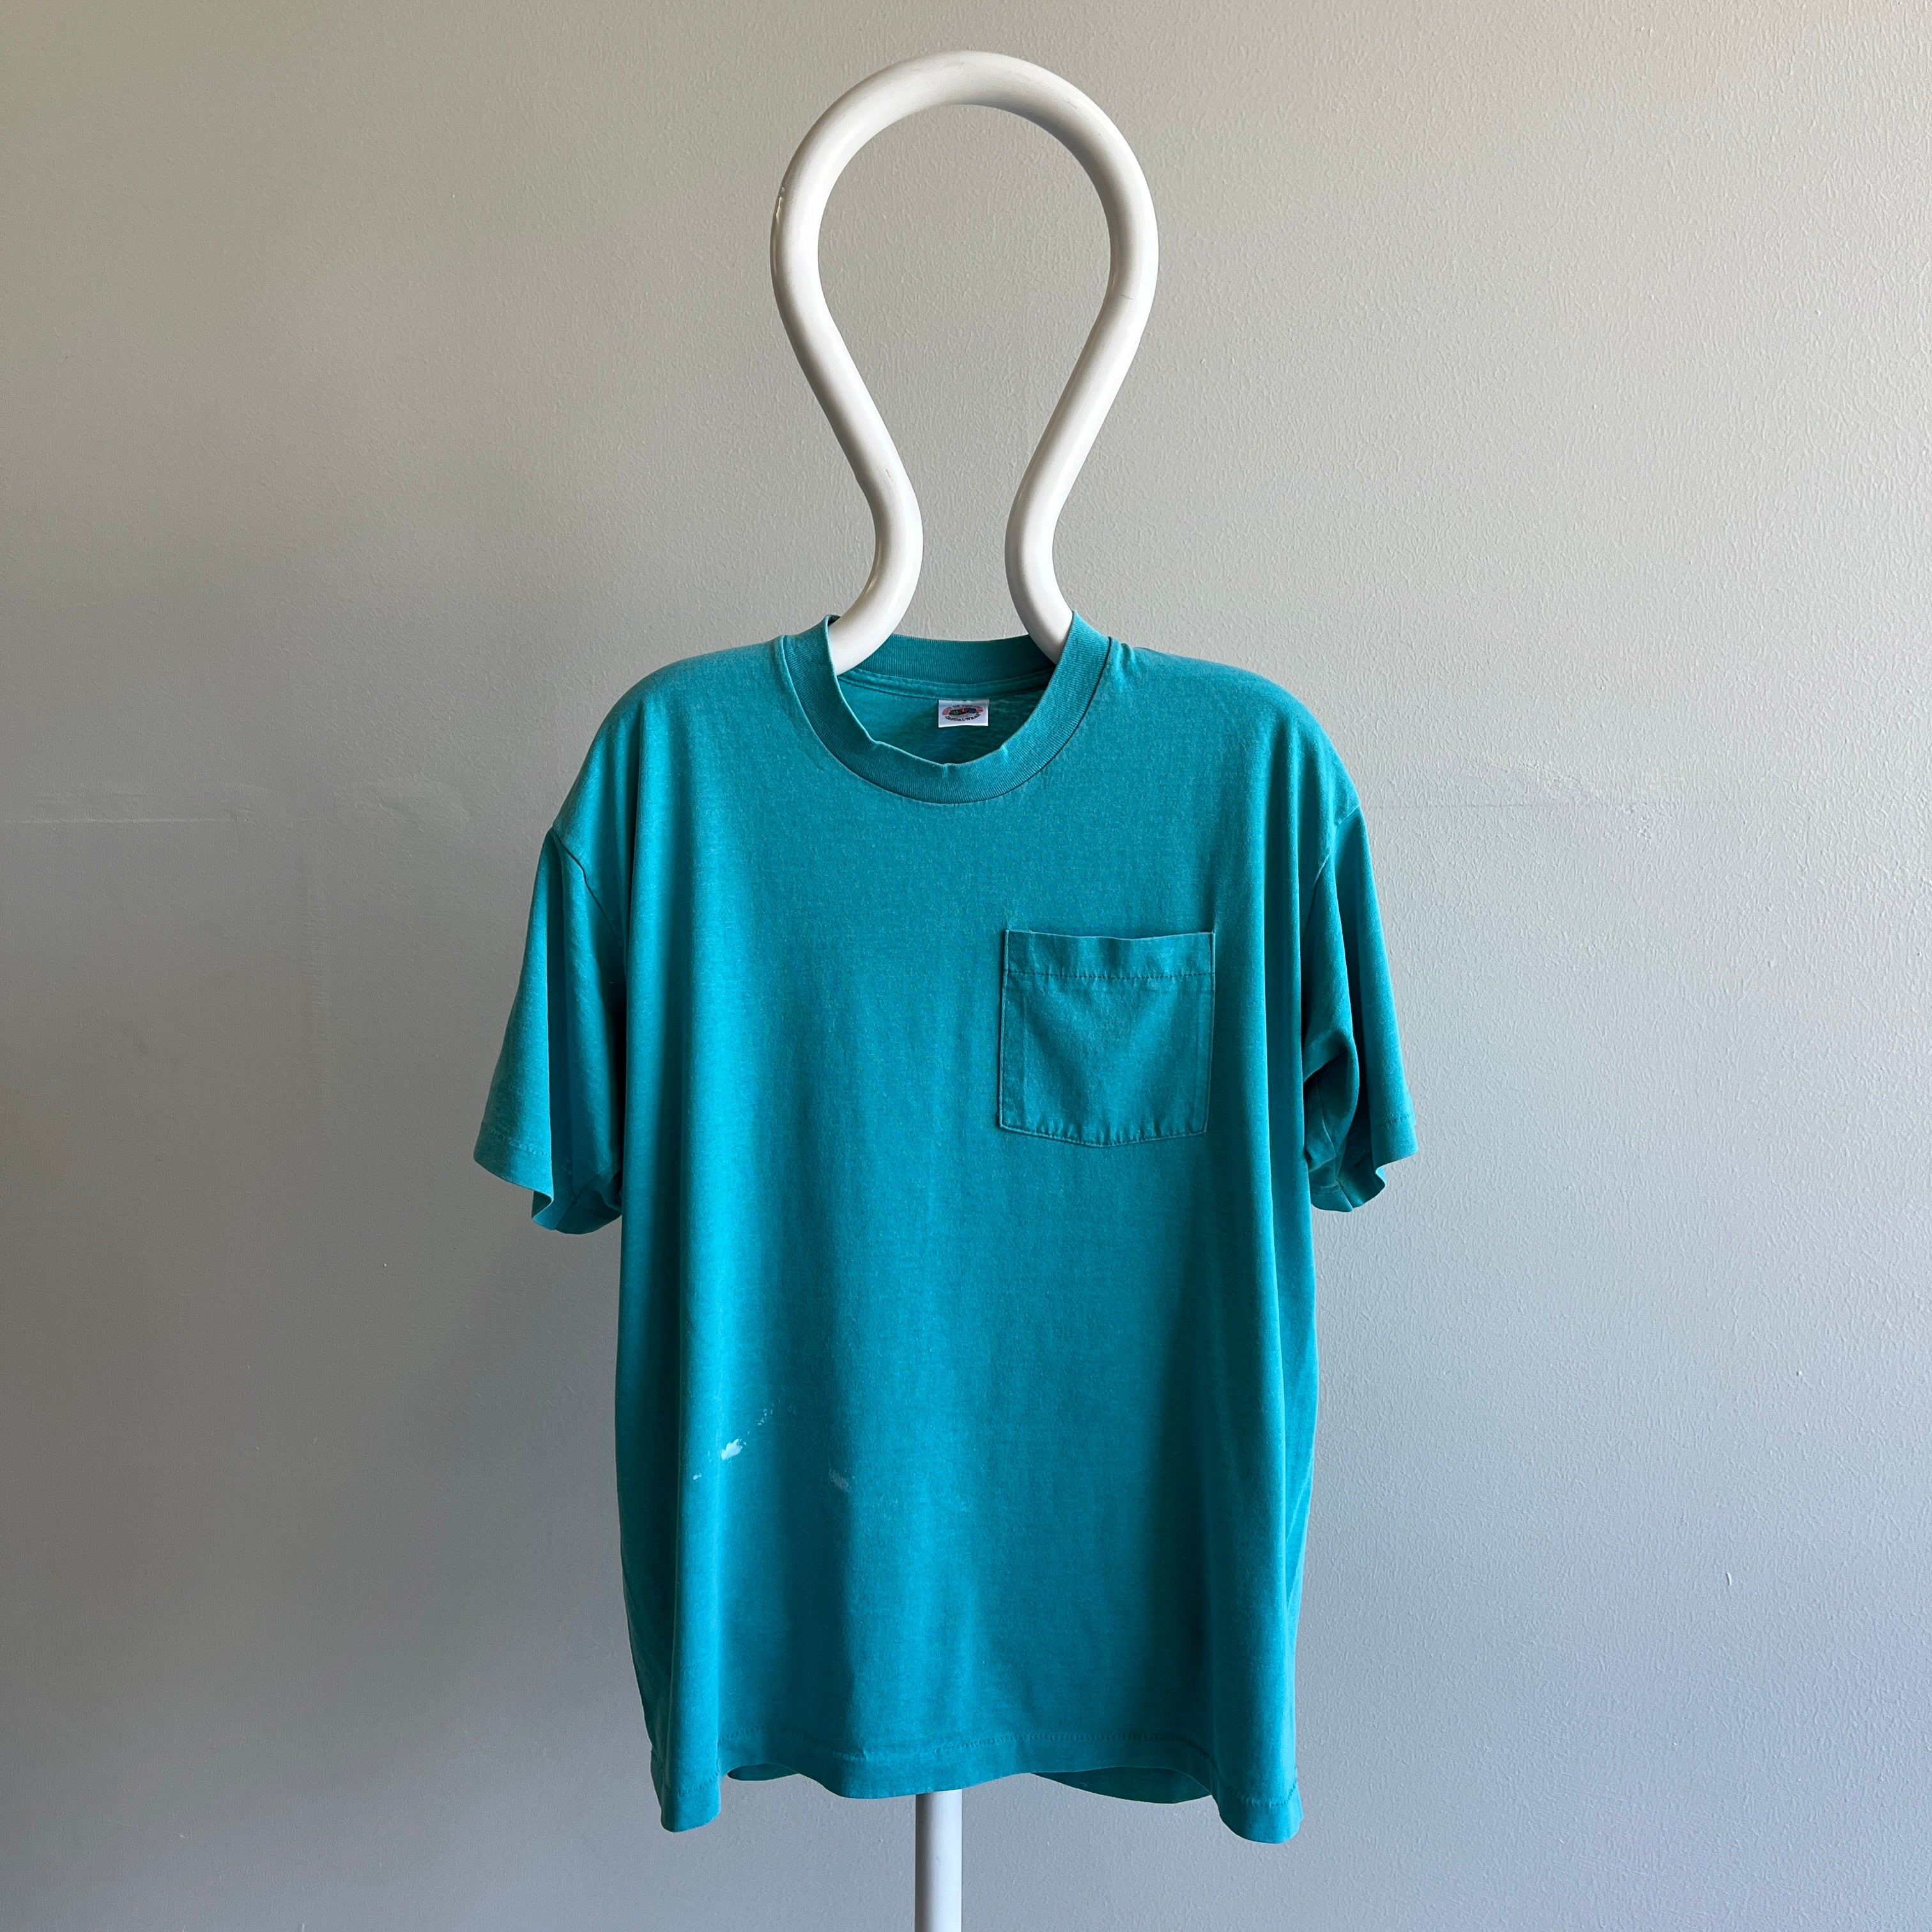 1980s Paint Stained Teal Single Stitch Pocket T-Shirt by FOTL